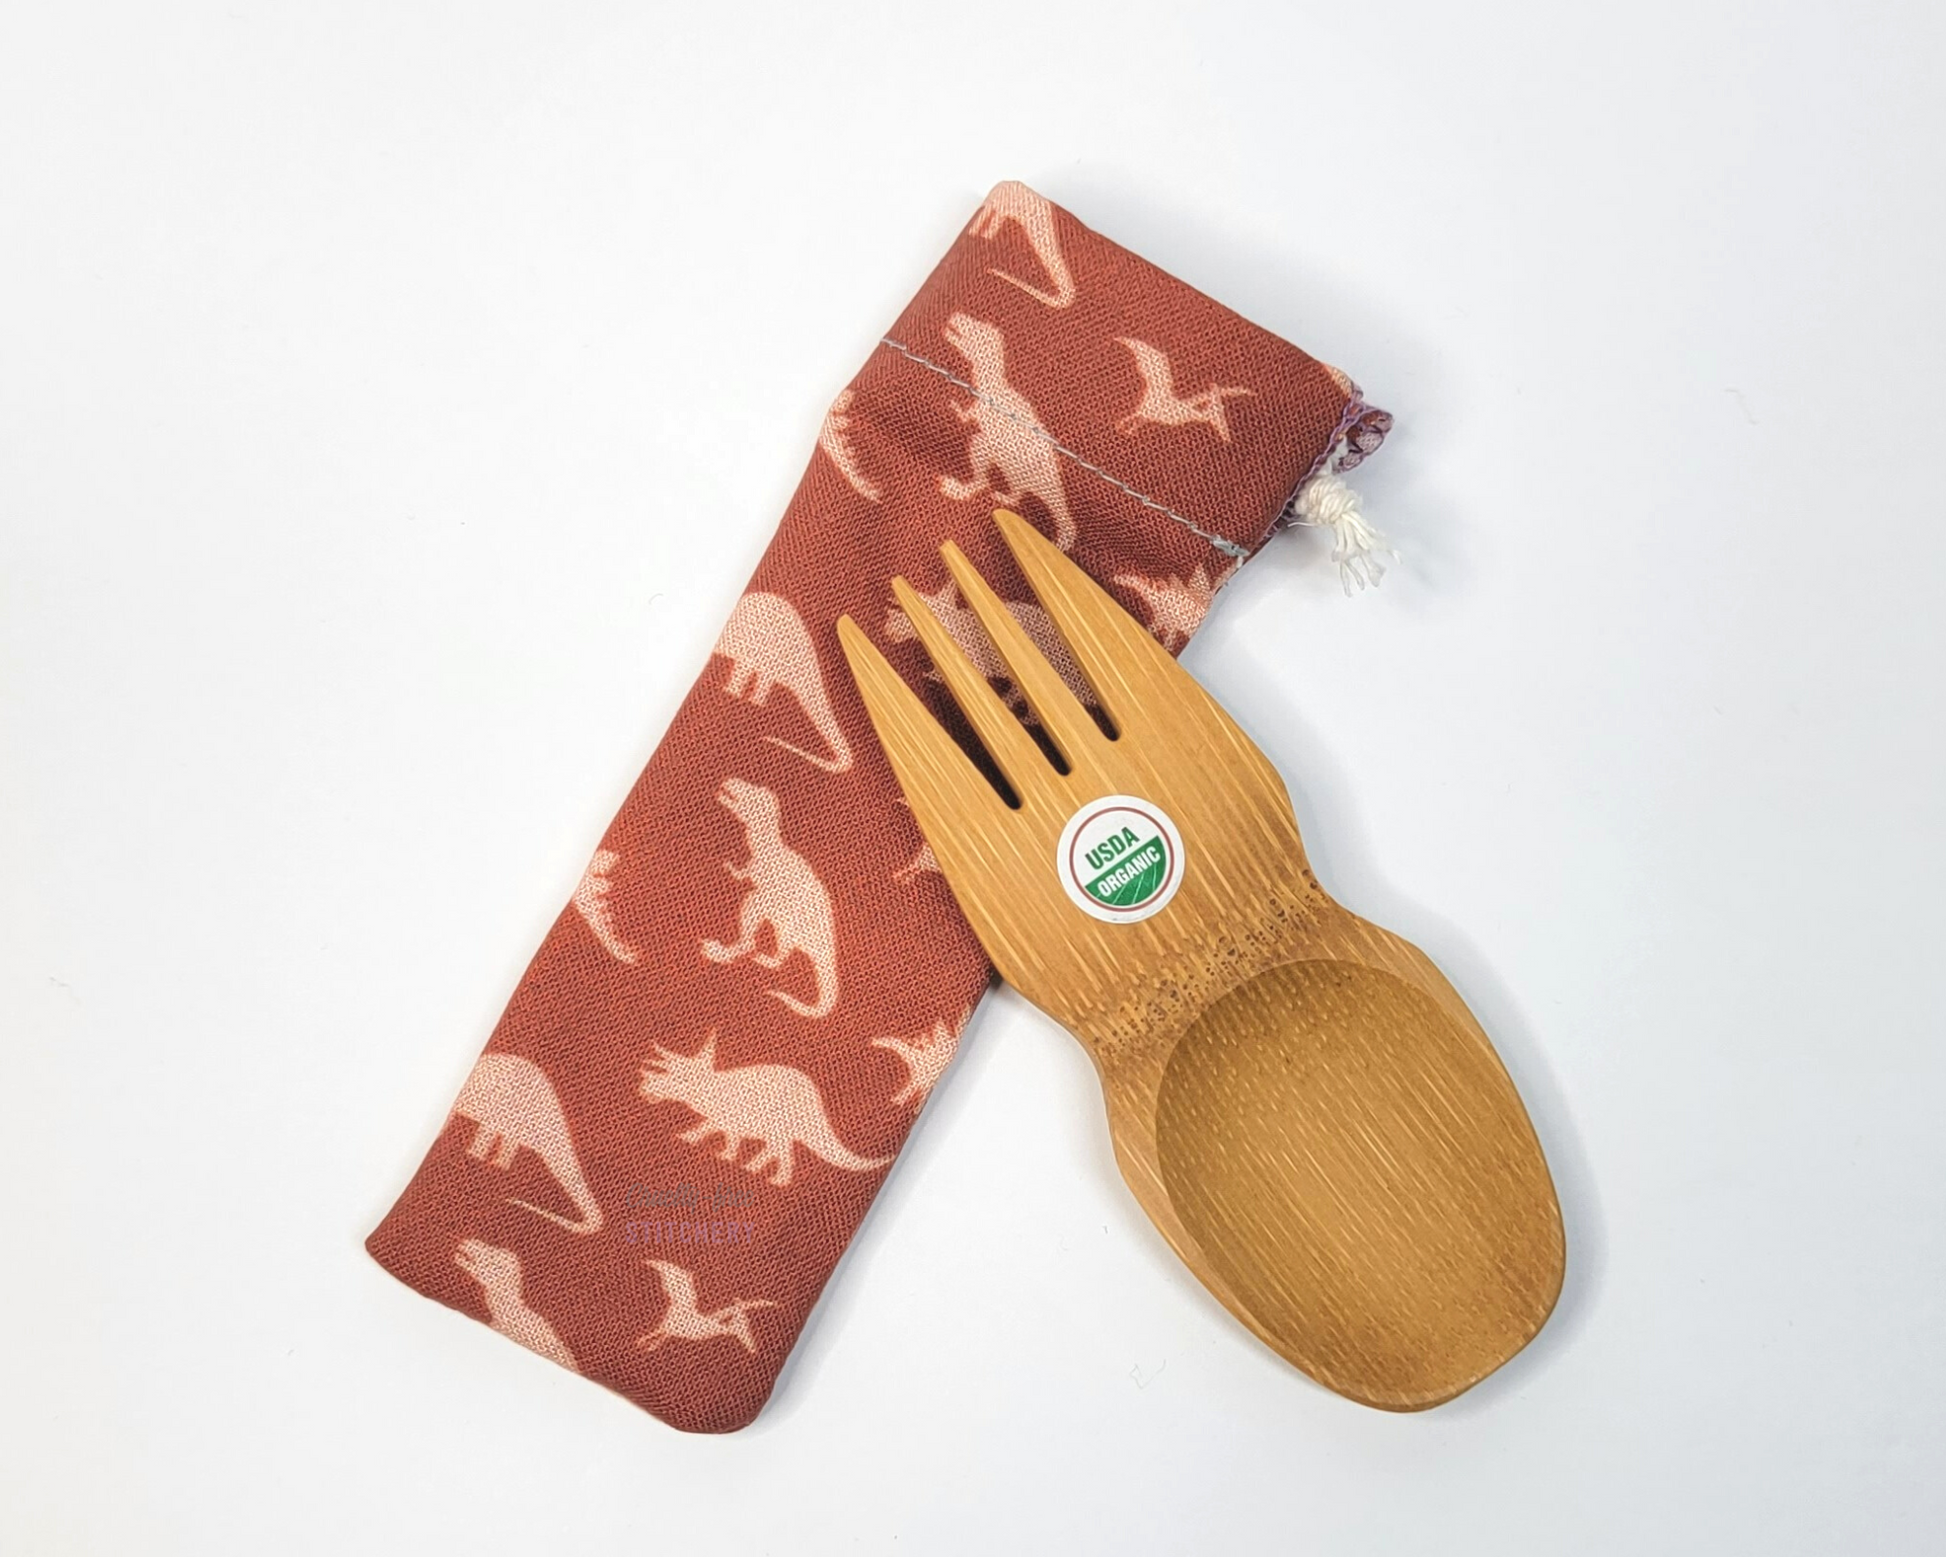 Reusable bamboo spork with pouch. The pouch is a dark orange with light orange dinosaurs. The pouch is sitting diagonally with the spork partially on top pointing the other way. The spork is small, a double ended fork and spoon.